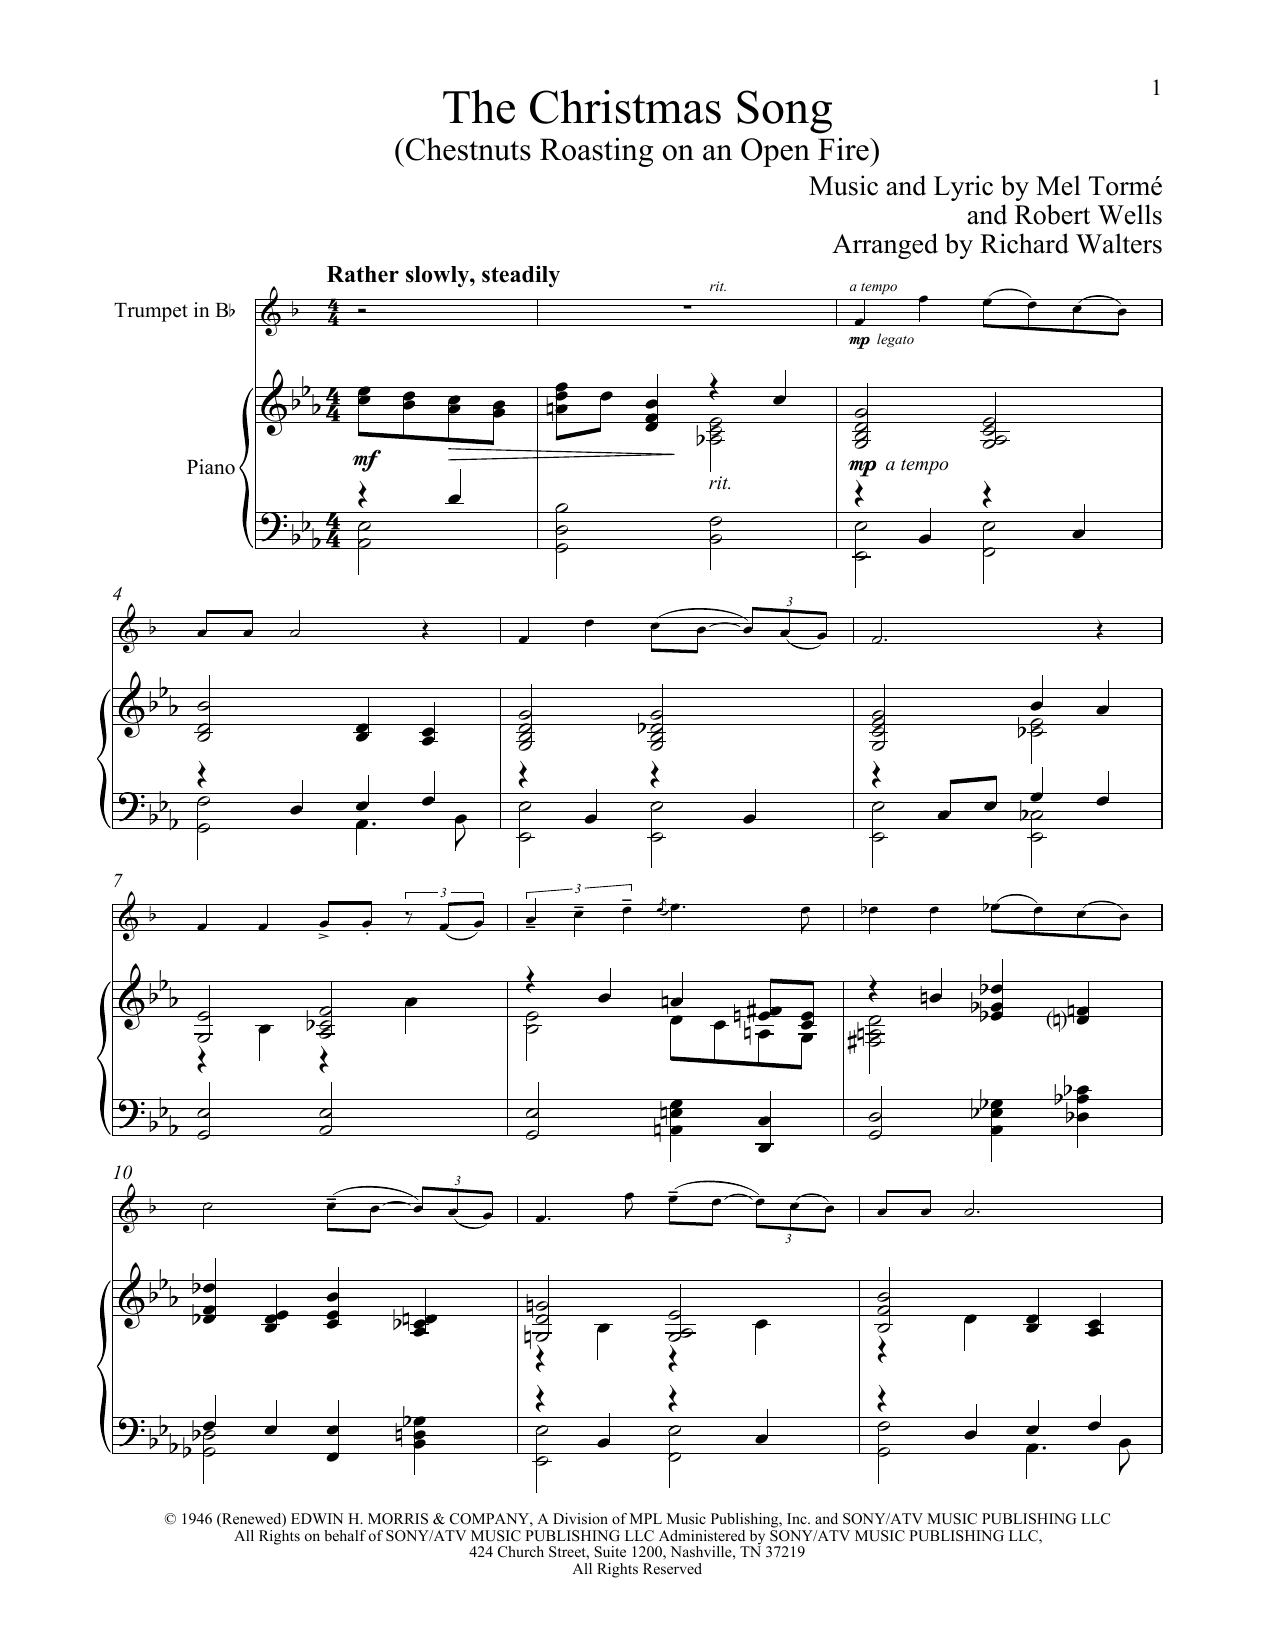 Download Mel Torme The Christmas Song (Chestnuts Roasting Sheet Music